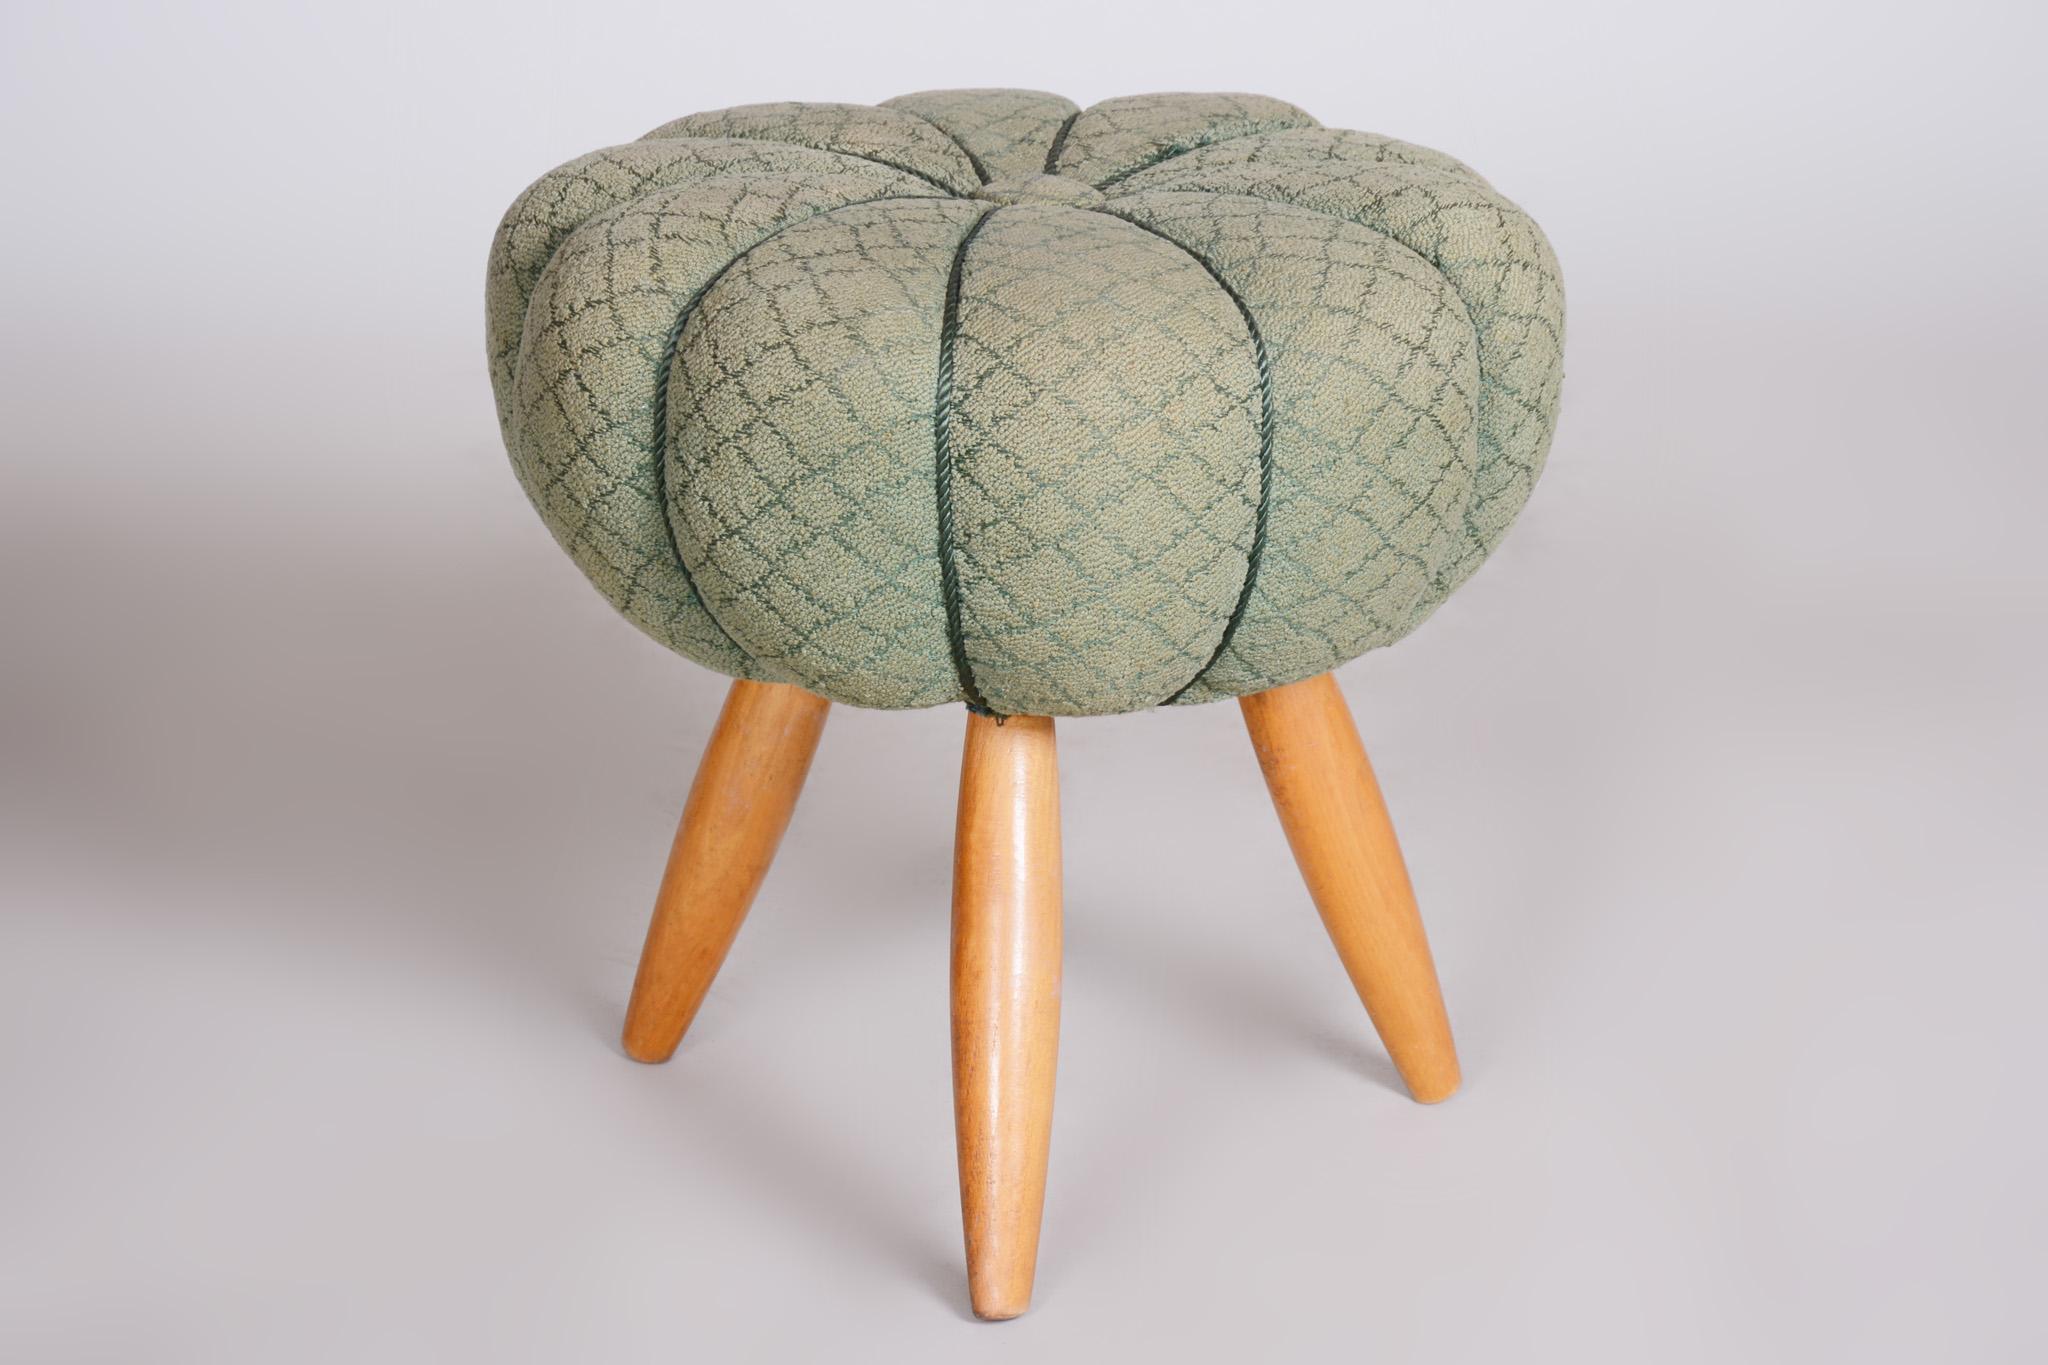 Mid-Century Modern Green Midcentury Beech Stool, 1950s, Original Preserved Condition For Sale